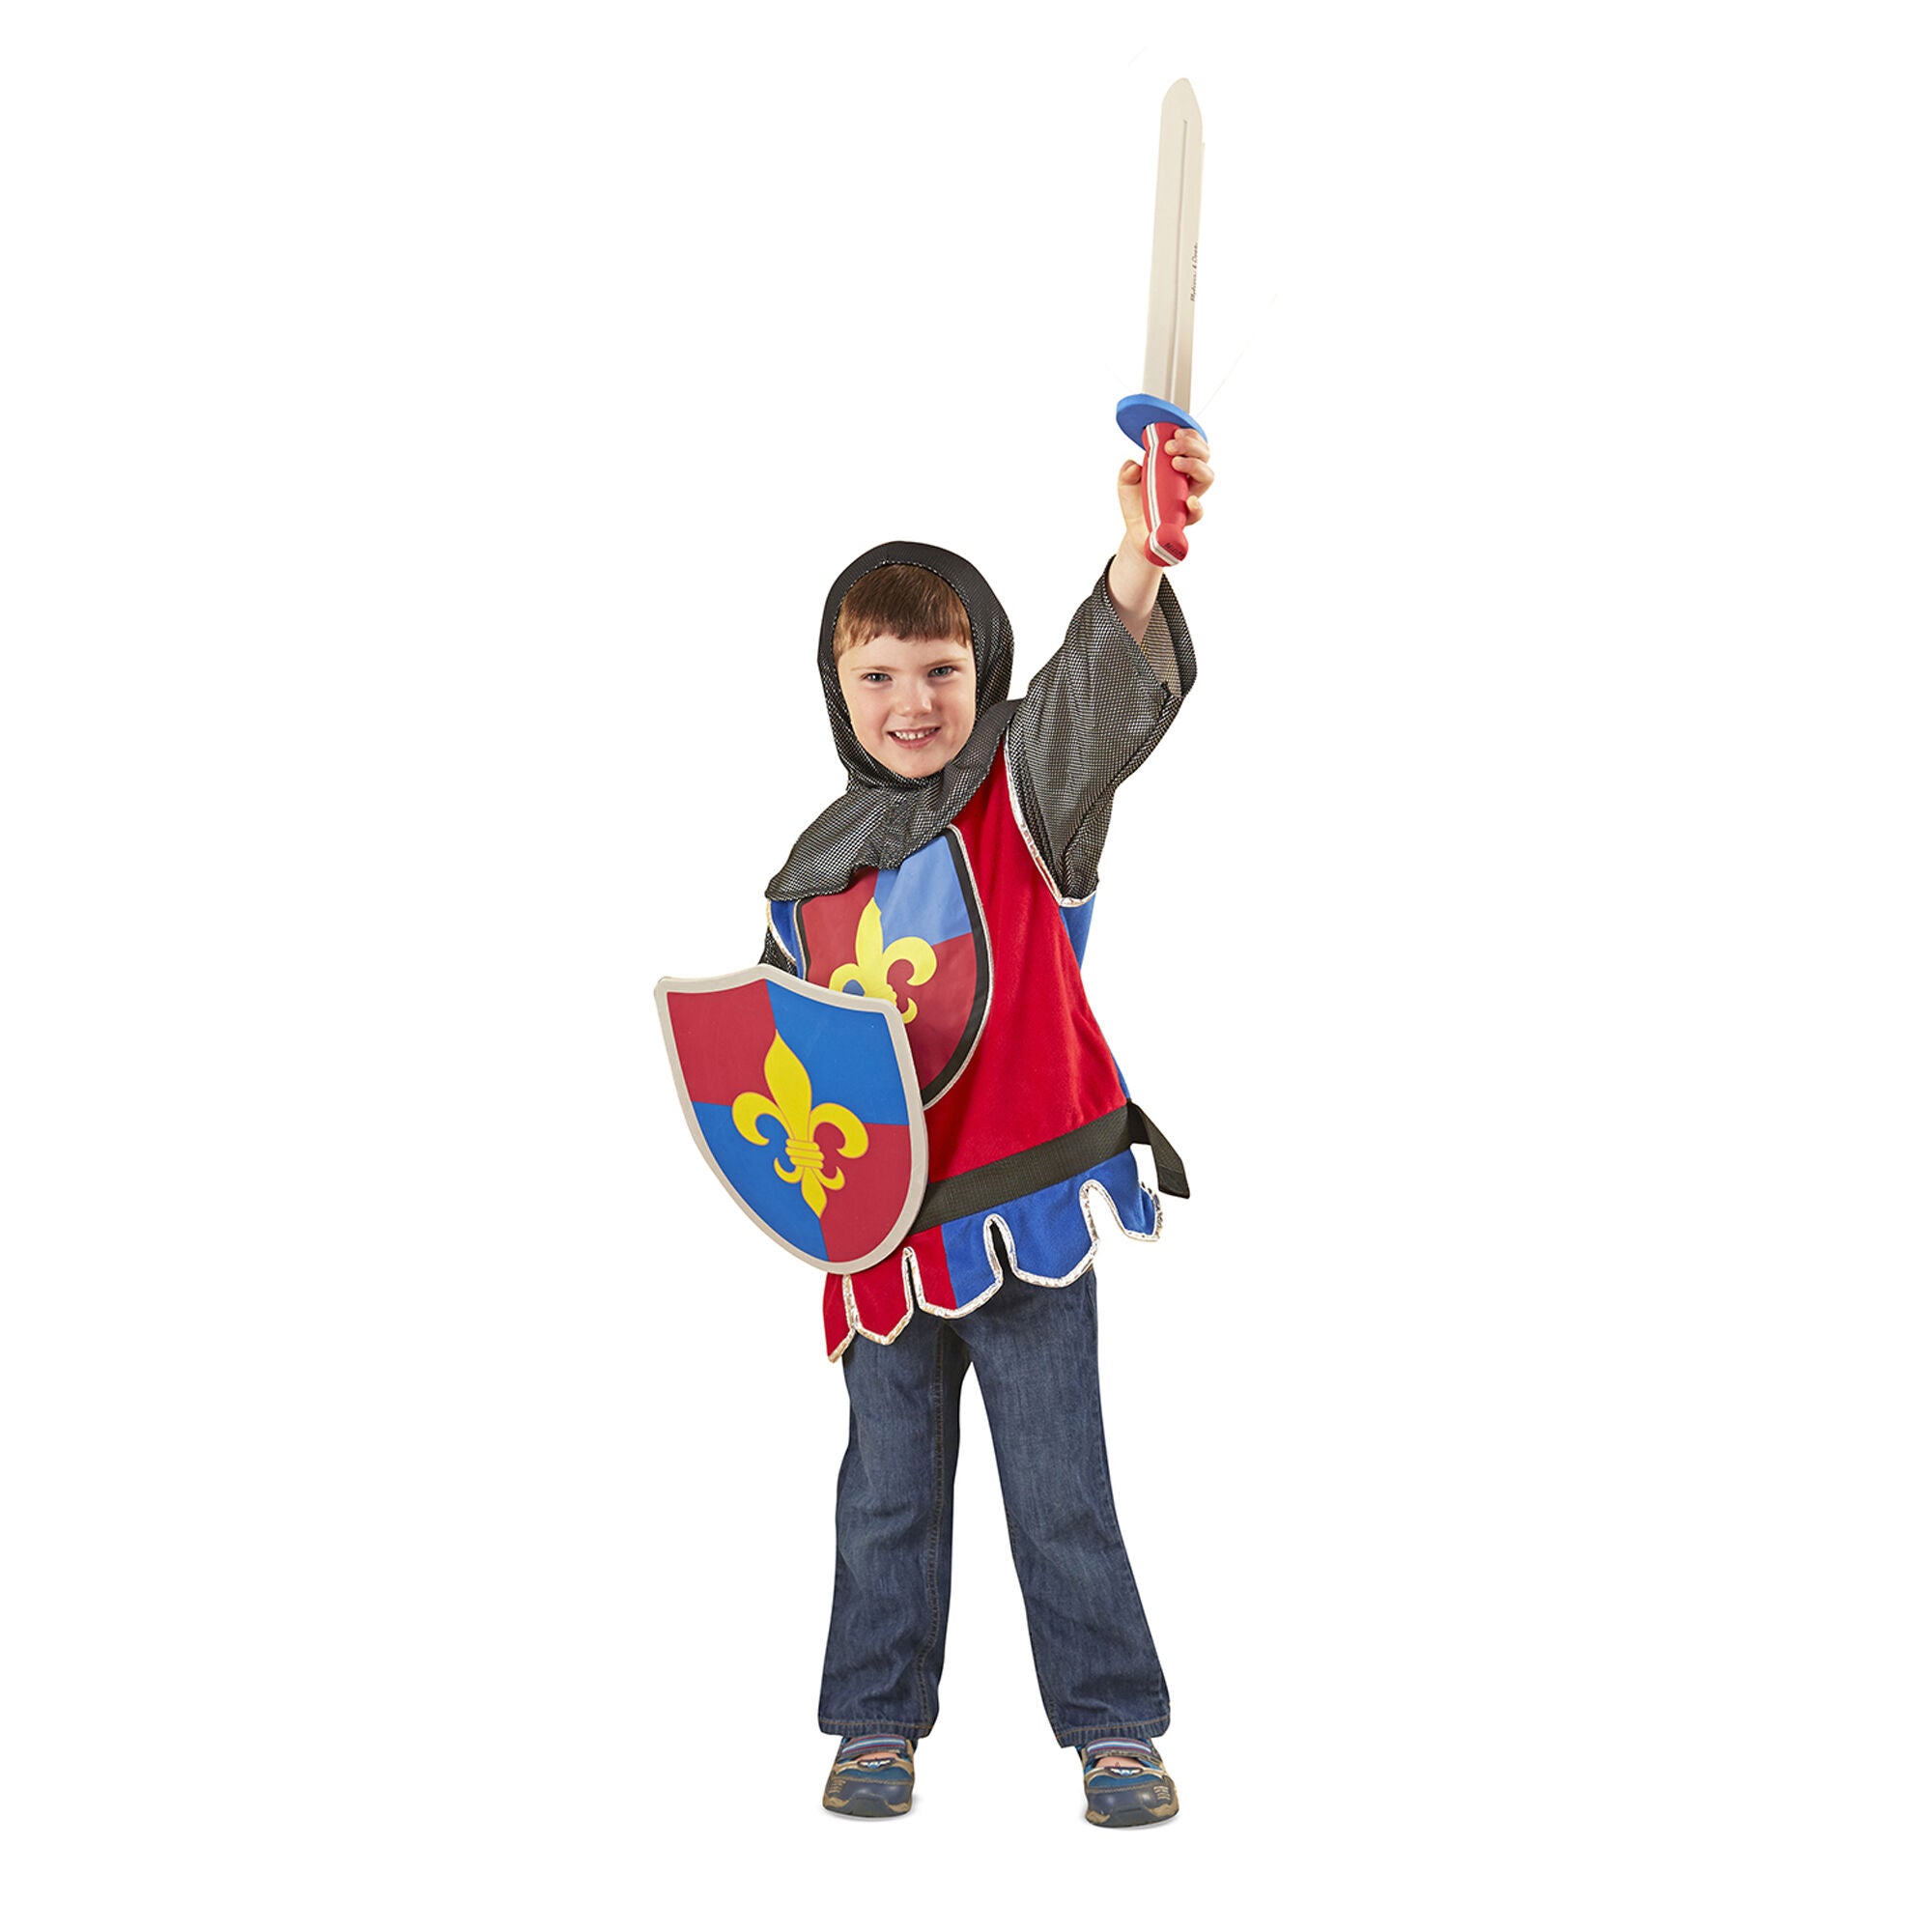 Knight Role Play Costume Set by Melissa & Doug 4849